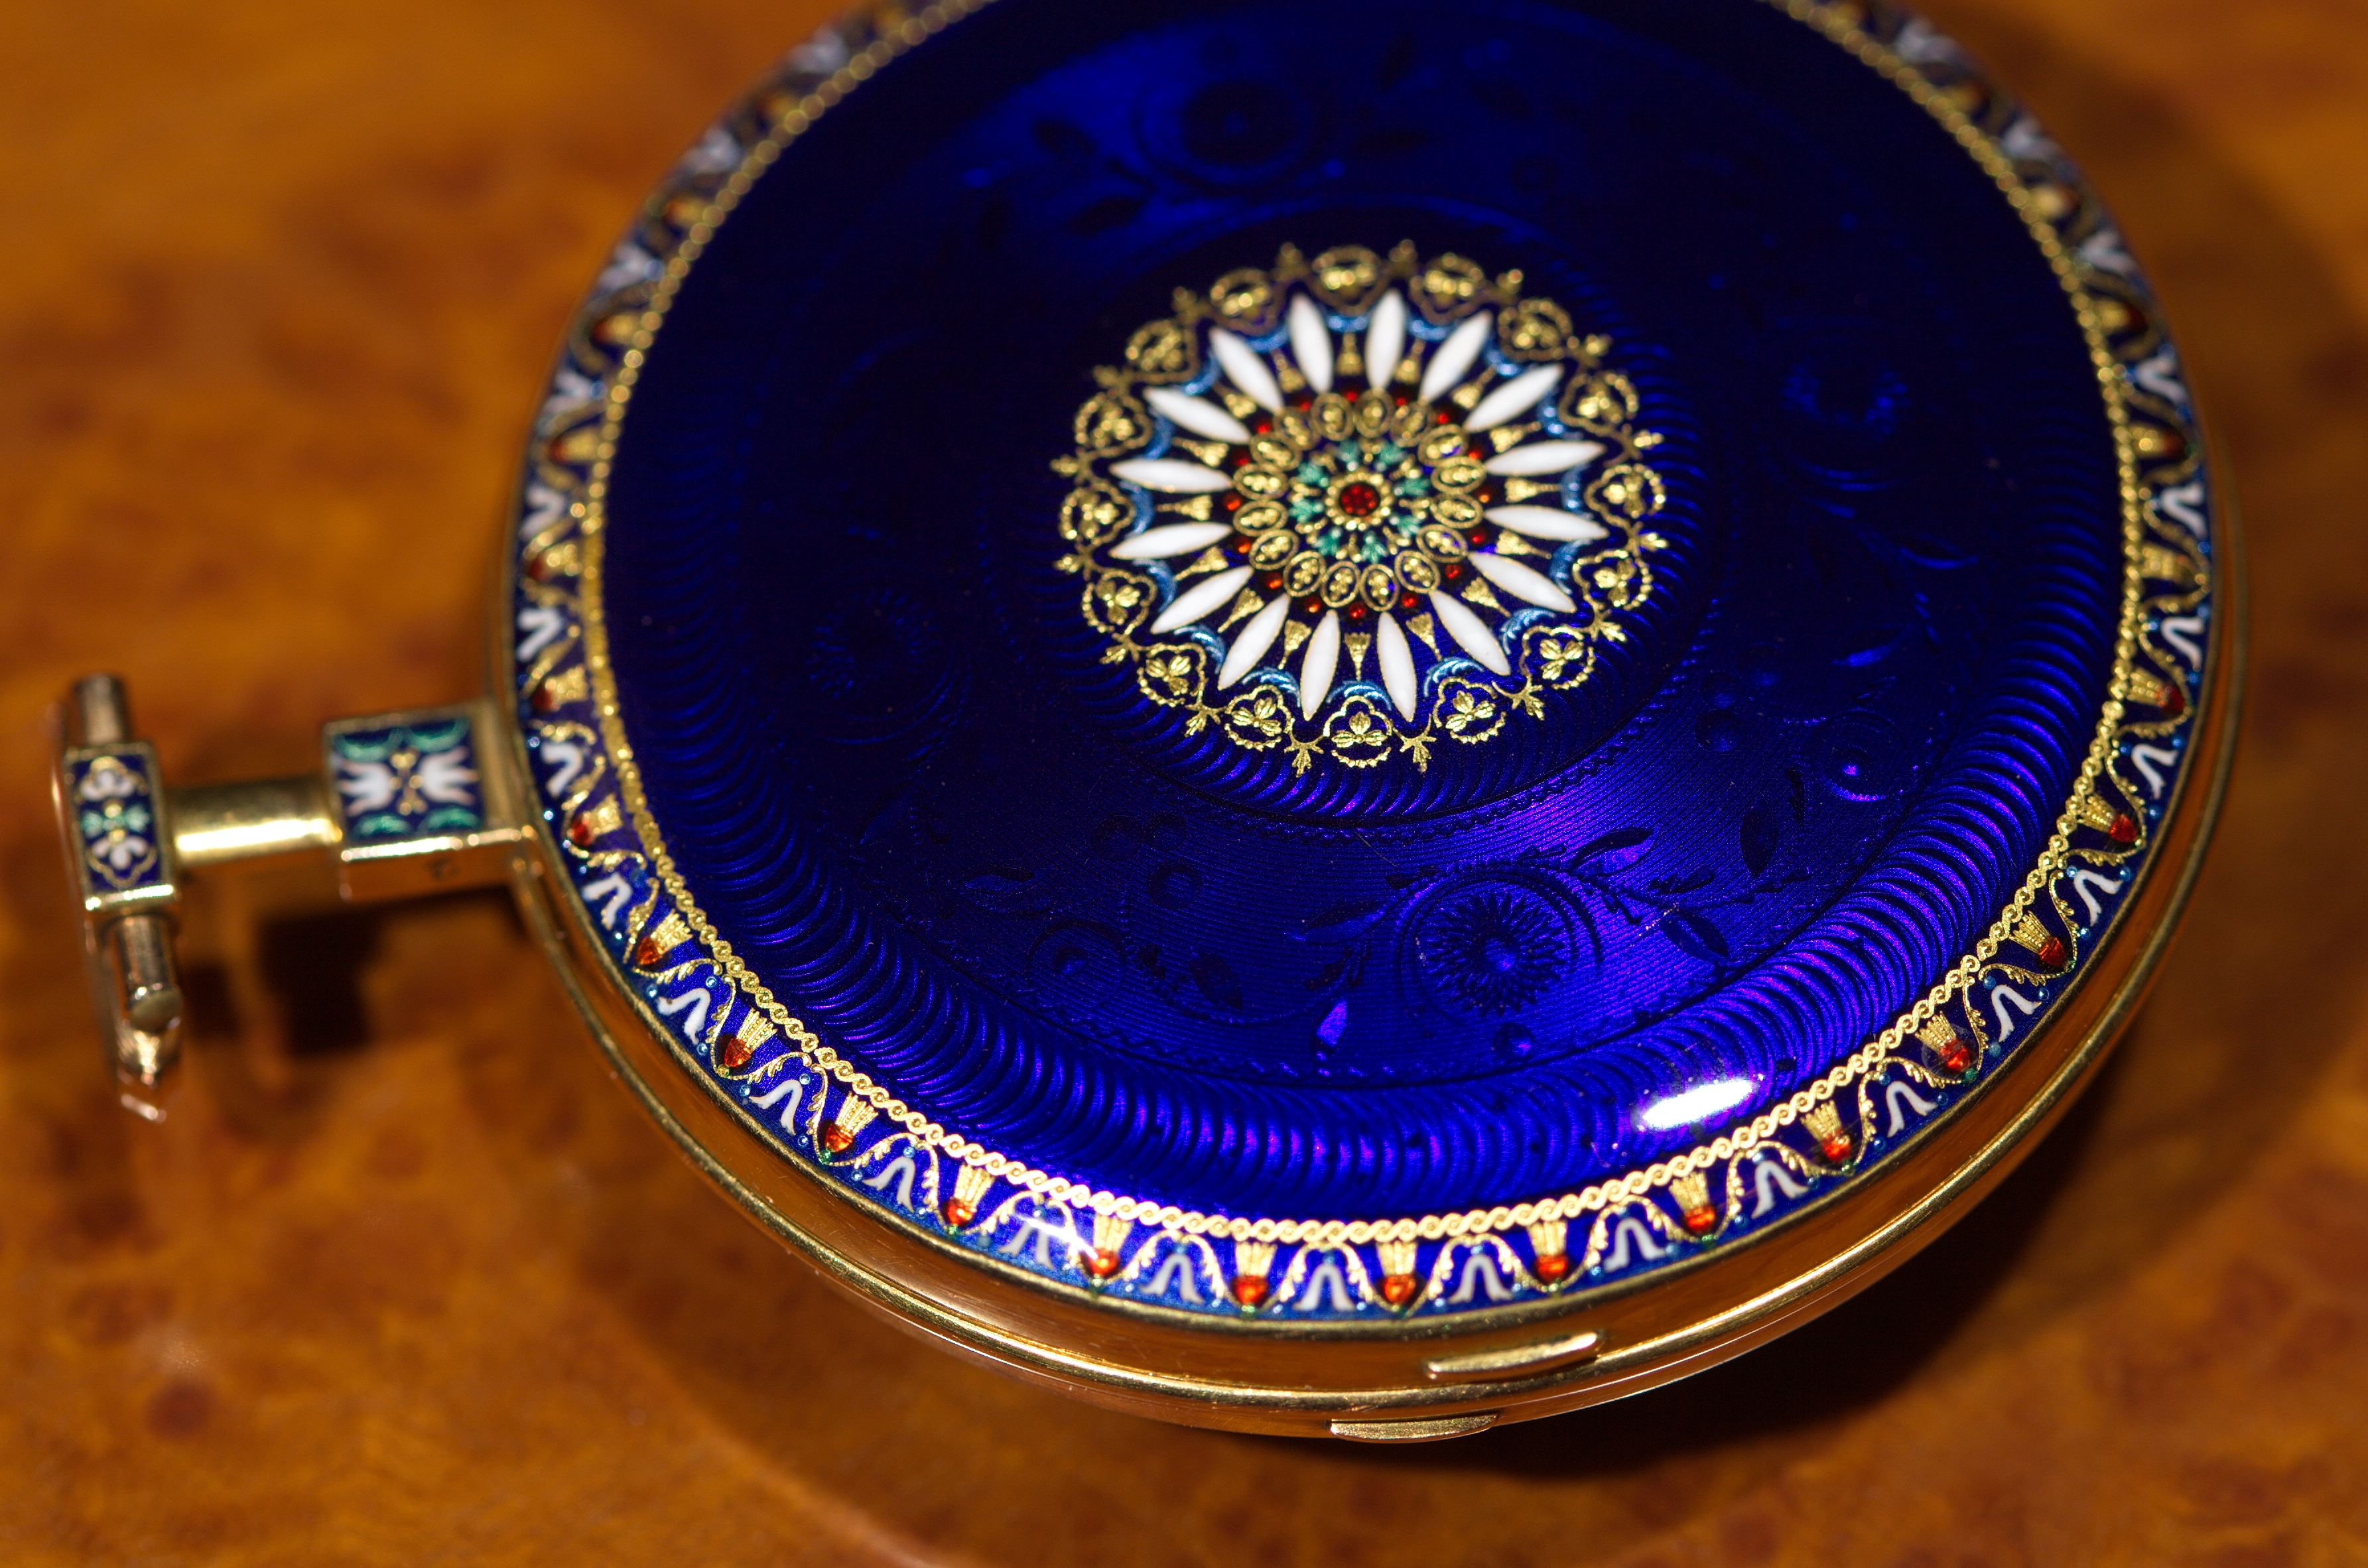 Wallpaper, old, blue, macro, gold, time, antique, watch, timepiece, pocketwatch, blueandgold, flickrfriday, enamelled, somethinggoldsomethingblue 3570x2364